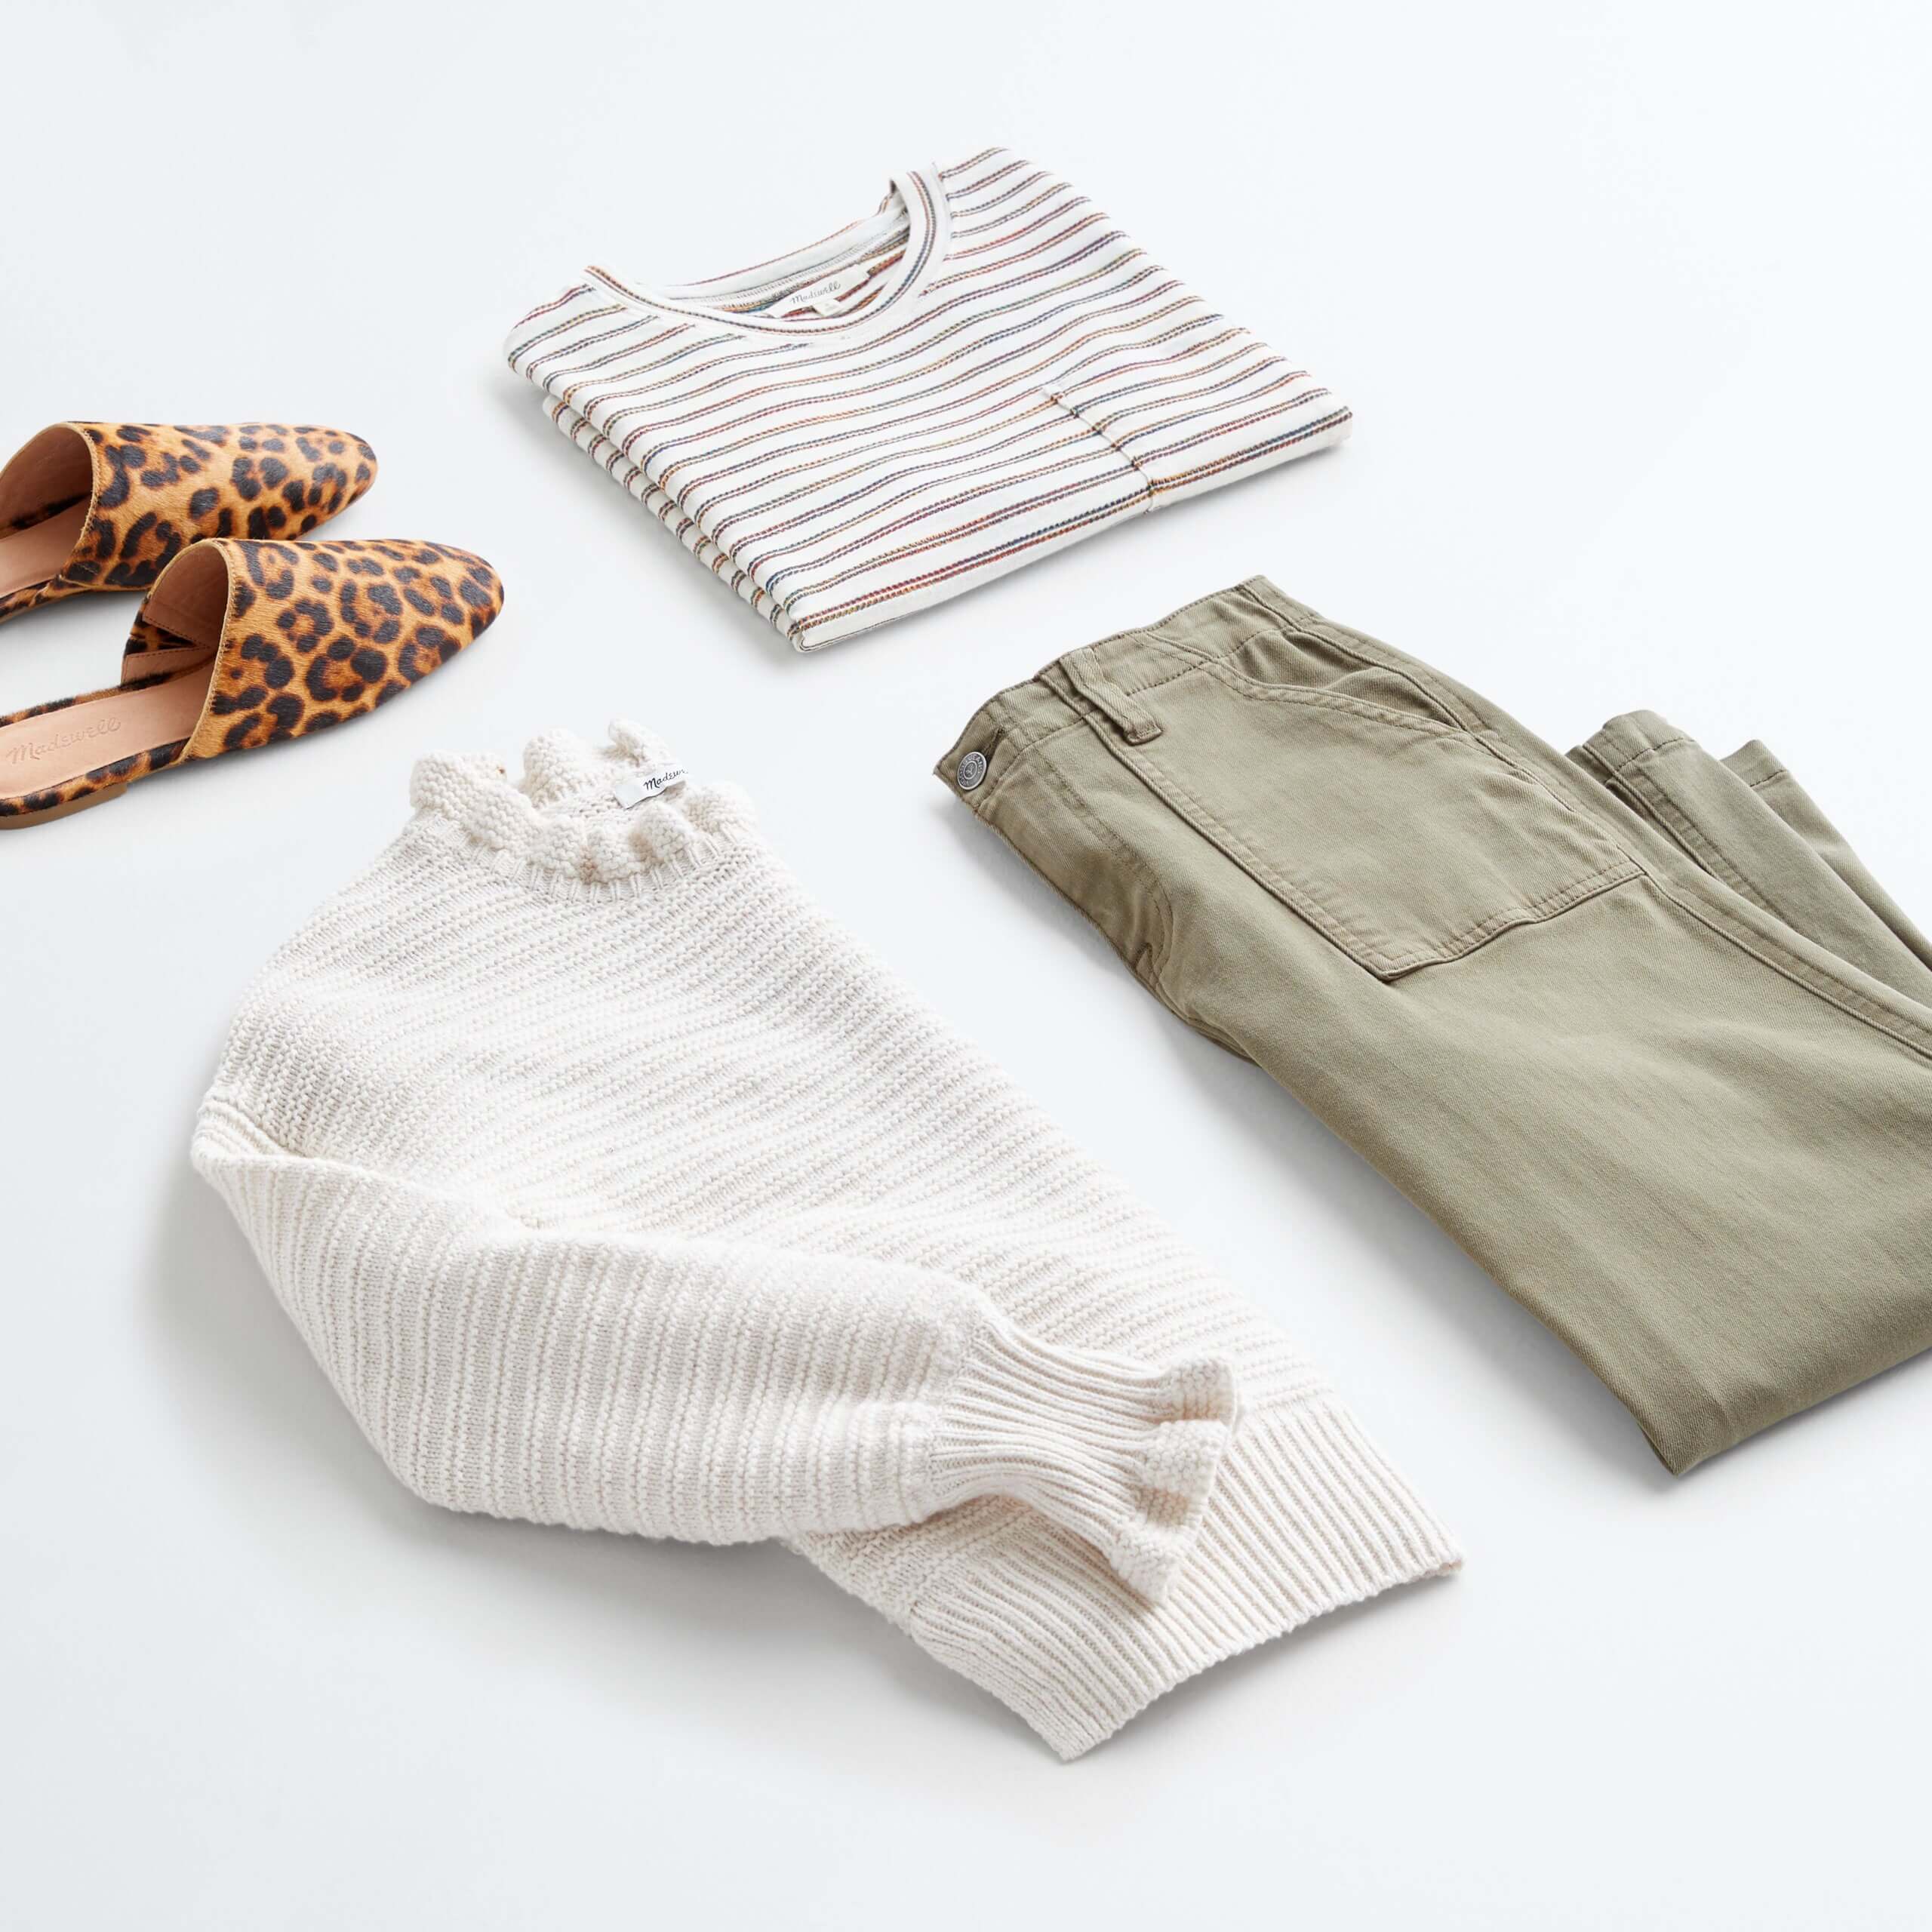 Stitch Fix Women's outfit laydown featuring olive utility pants, beige pullover sweater, striped tee and animal-print slide-on flats.